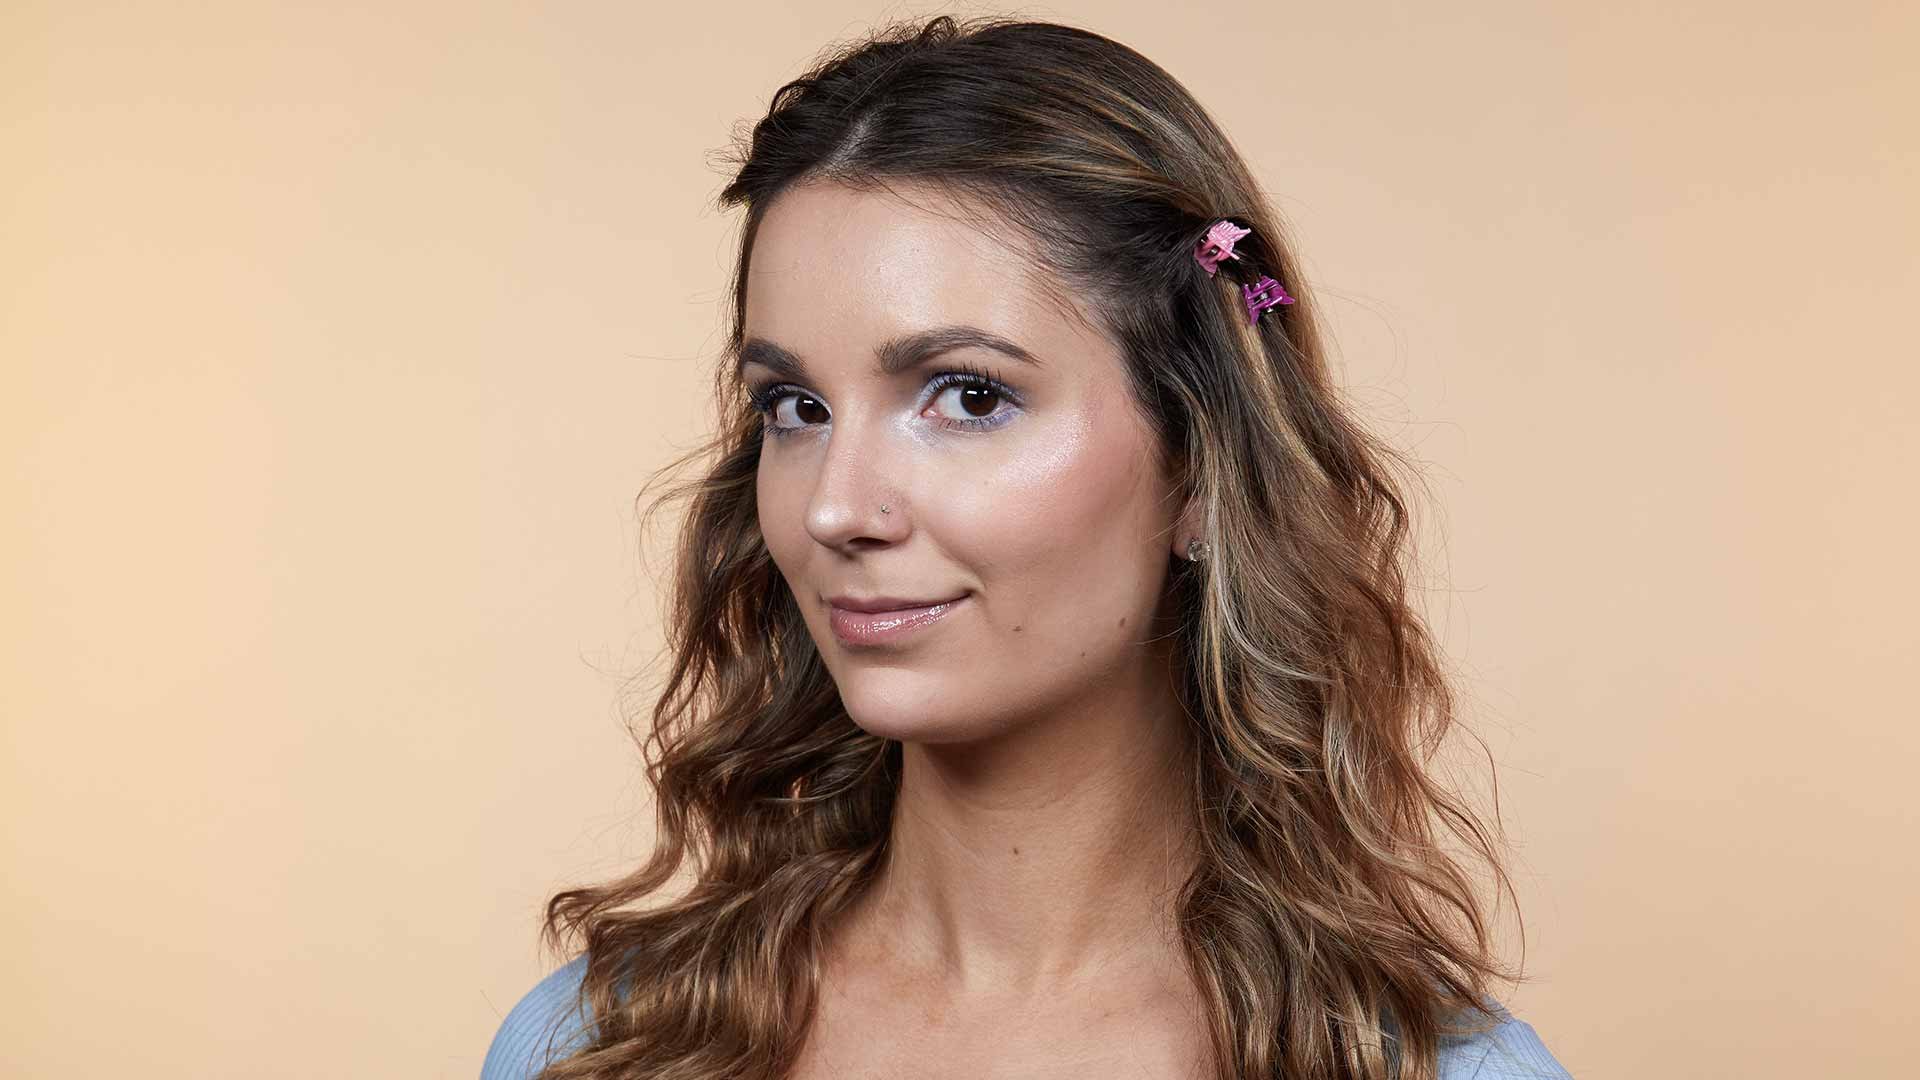 How To Wear Butterfly Clips and Look Stylish - L'Oréal Paris